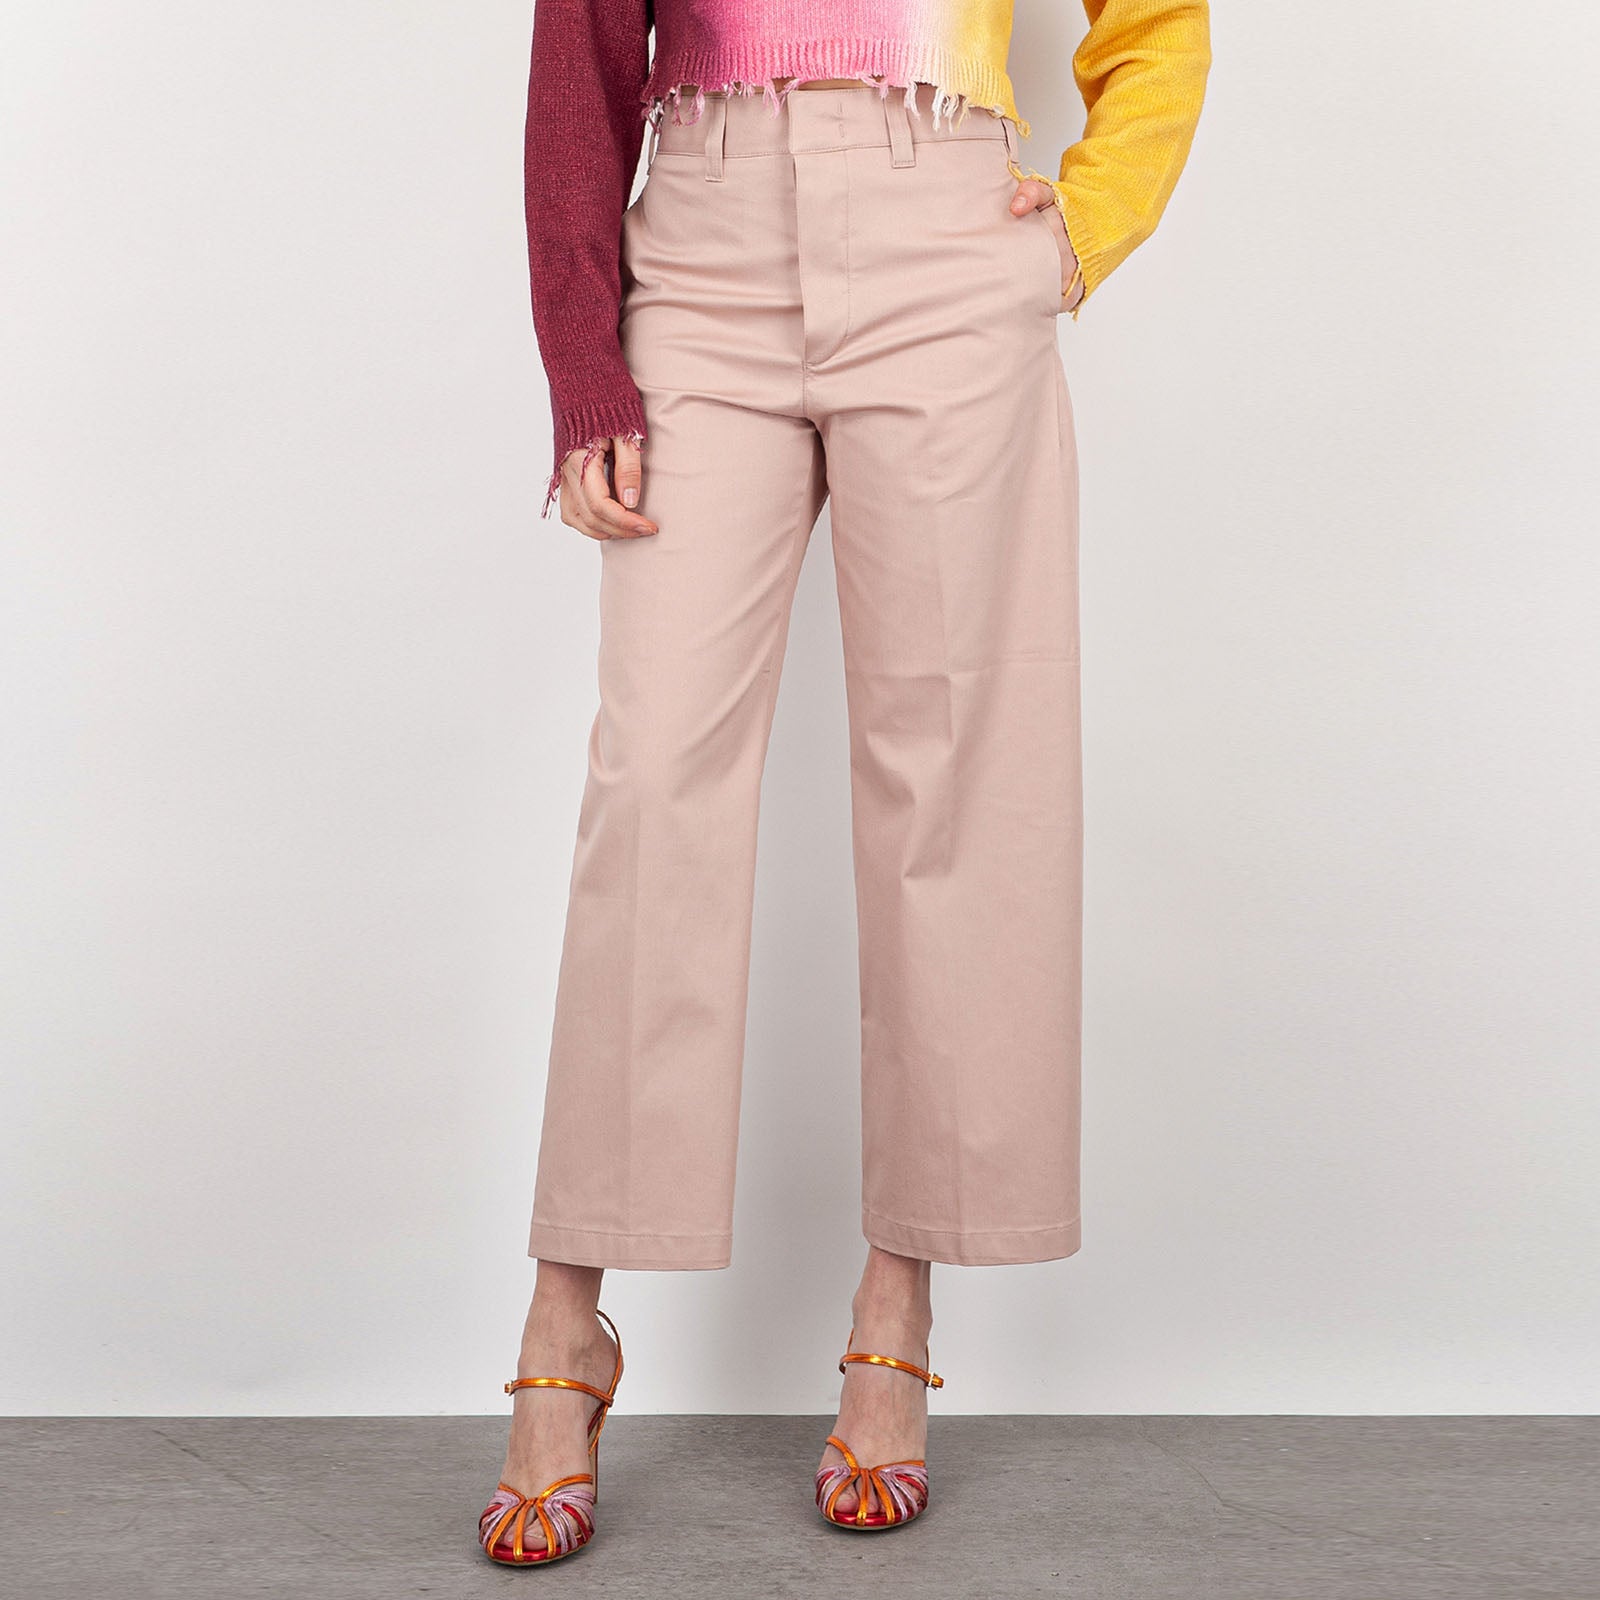 Department Five Crop Trousers Side No Cotton Light Pink - 8